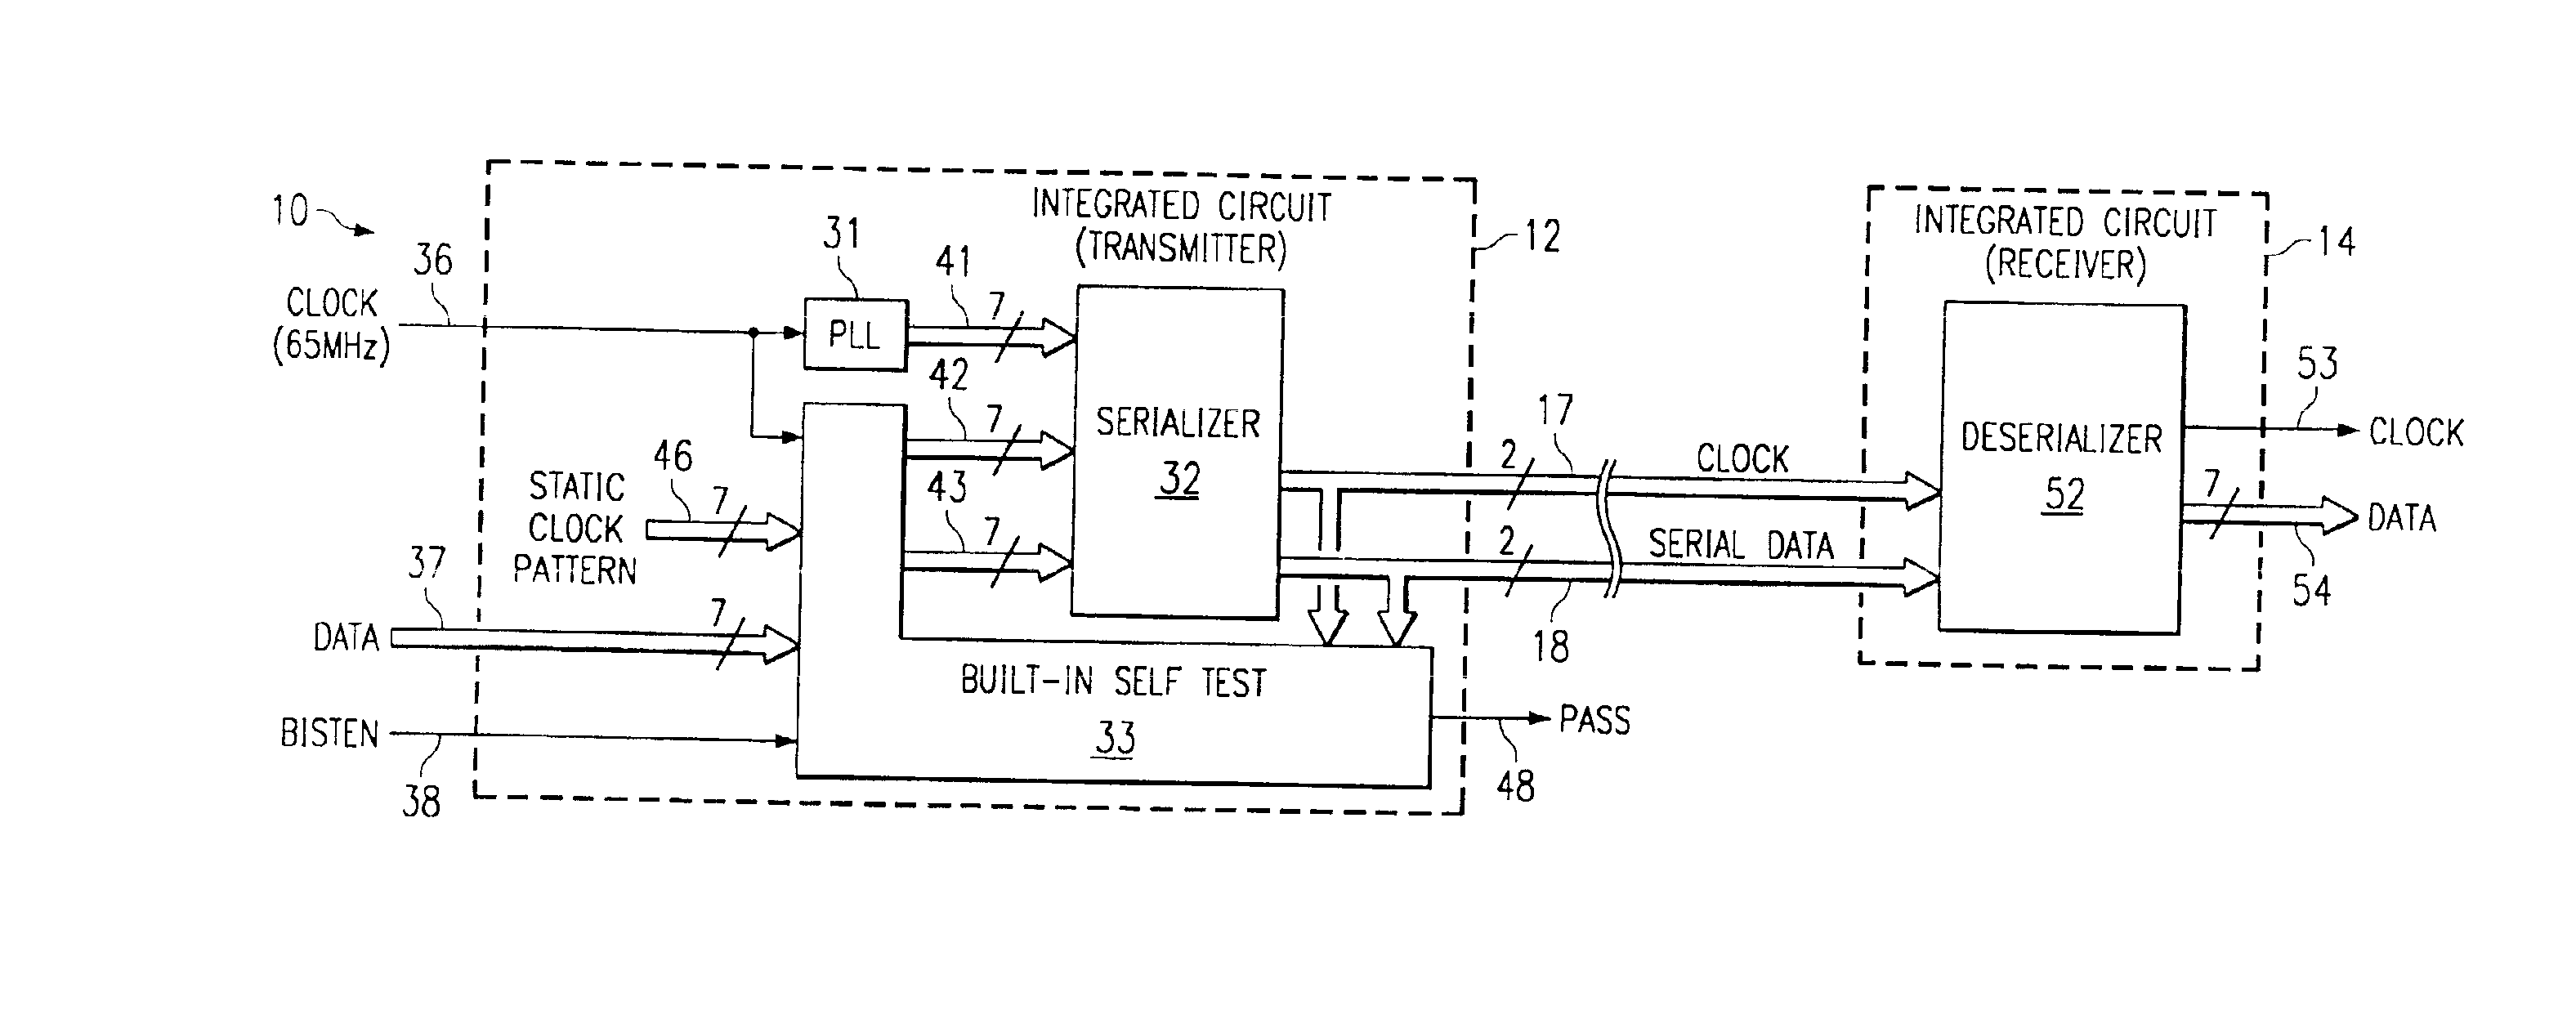 Method and apparatus for testing a serial transmitter circuit